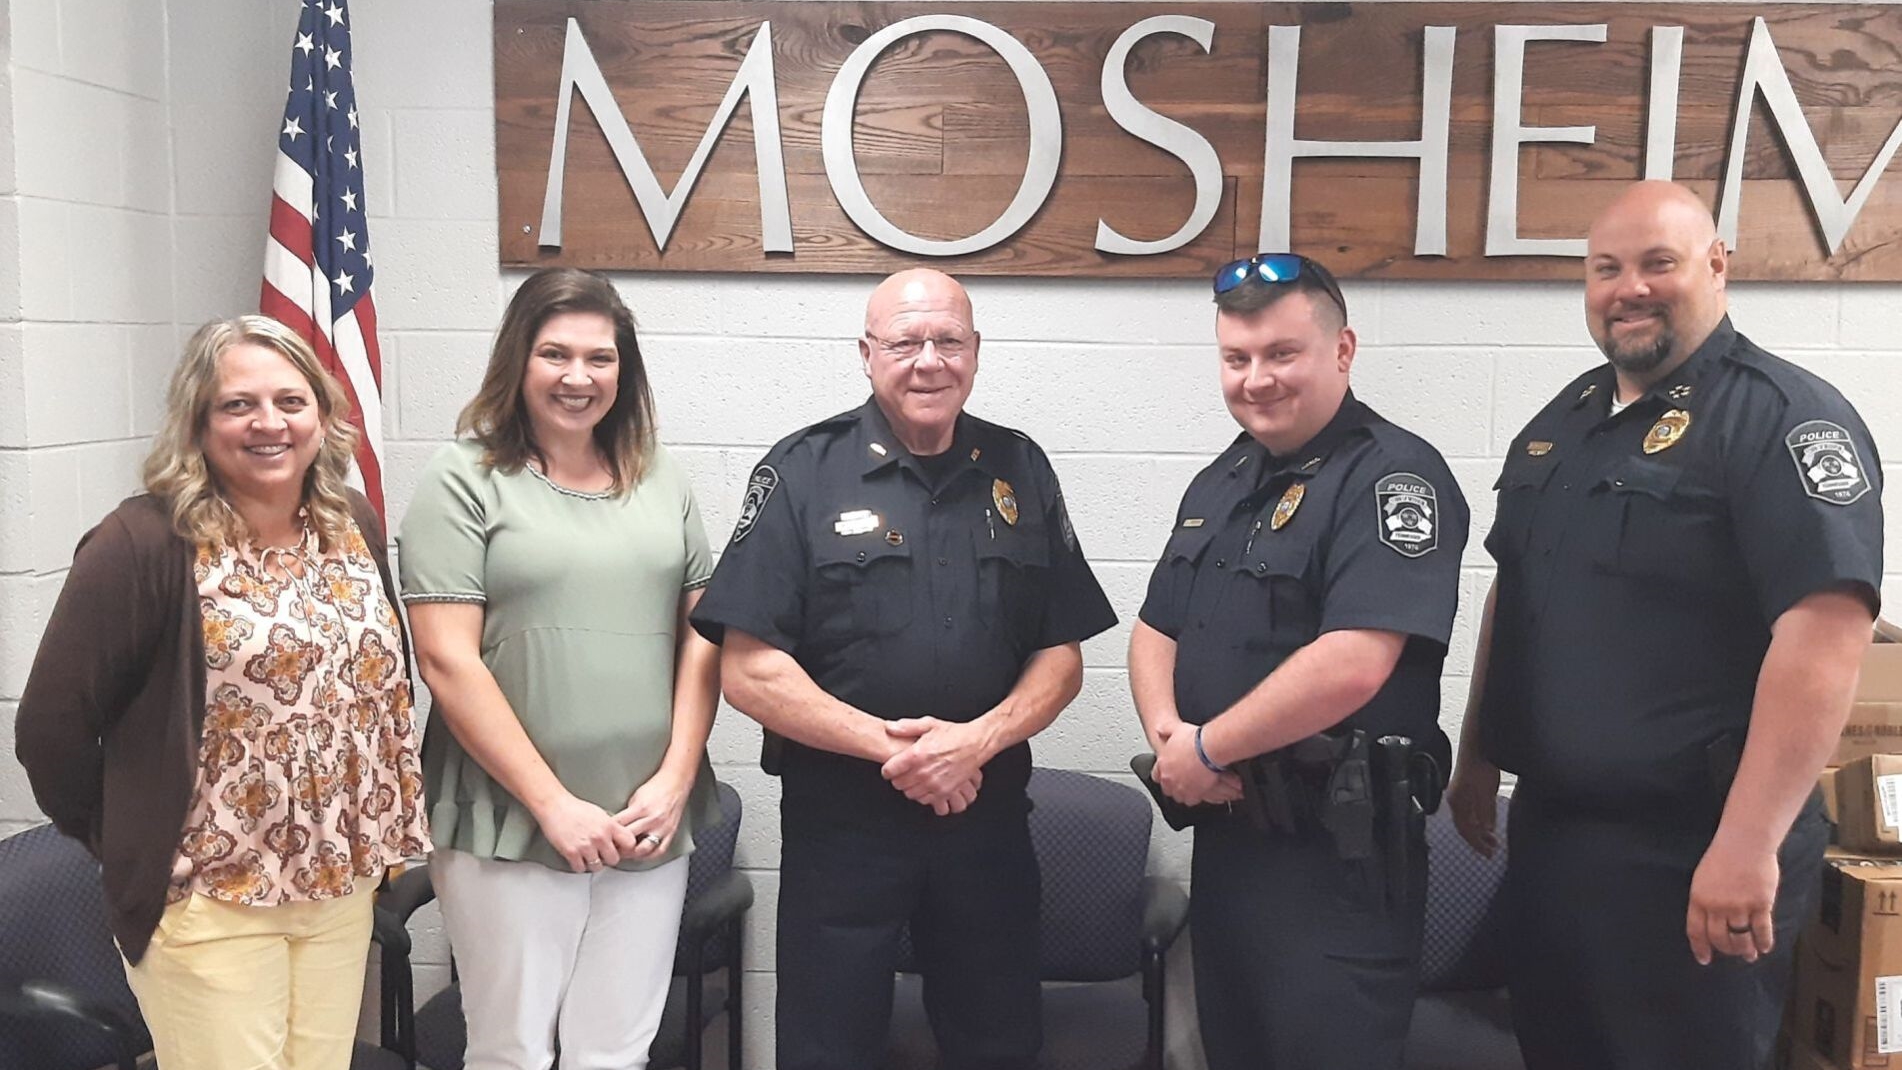 The Drug Abuse Resistance Education program will be returning to Mosheim schools next school year. Pictured from left are West Greene Middle School Principal Tamara Wykle, Mosheim Elementary School Principal Sarah Gray, Mosheim Police Department Investigator Fred Dobson, Patrolman Dustin Lawson and Police Chief Dustin Jeffers. Photo Special To The Sun